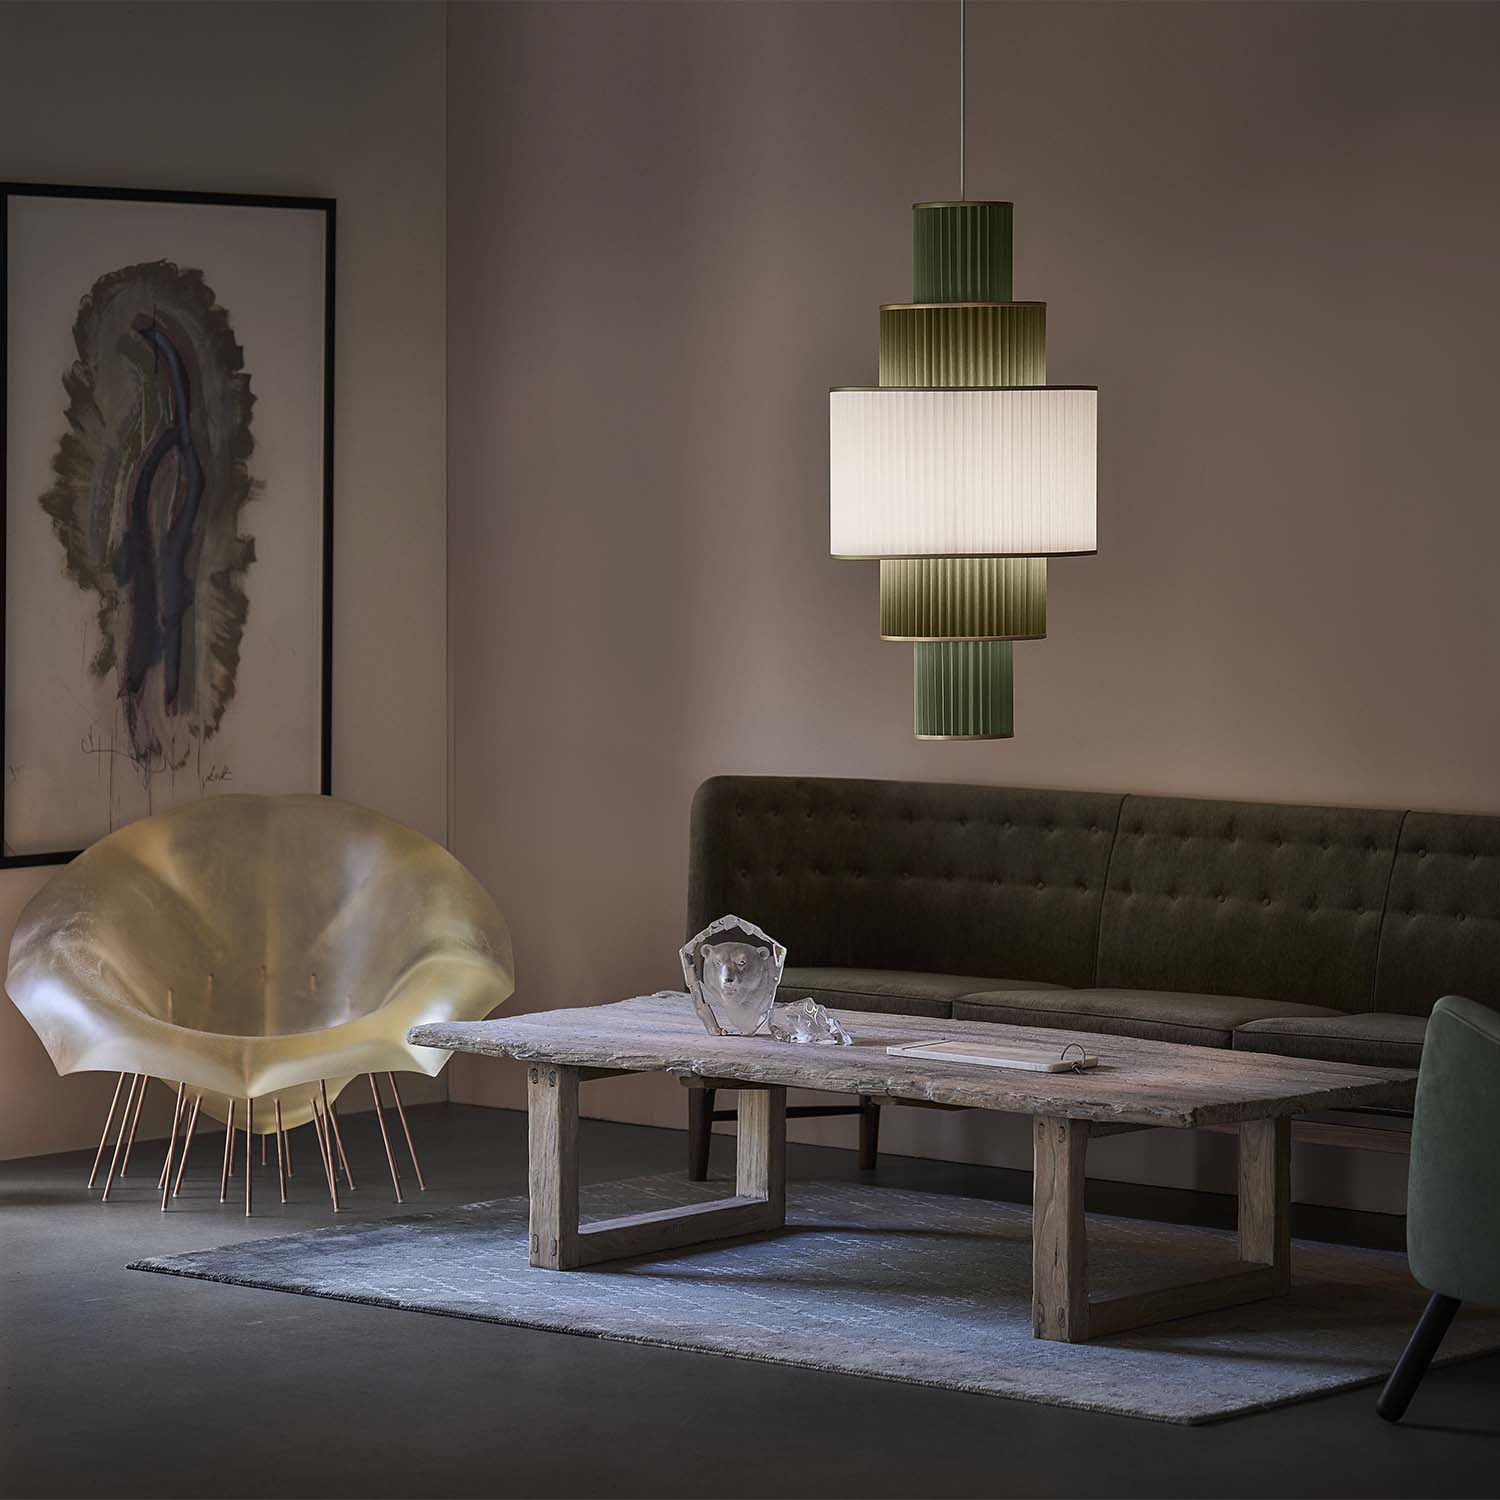 PLIVELLO 113 - Chic hanging lamp in artisanal pleated paper, white or green